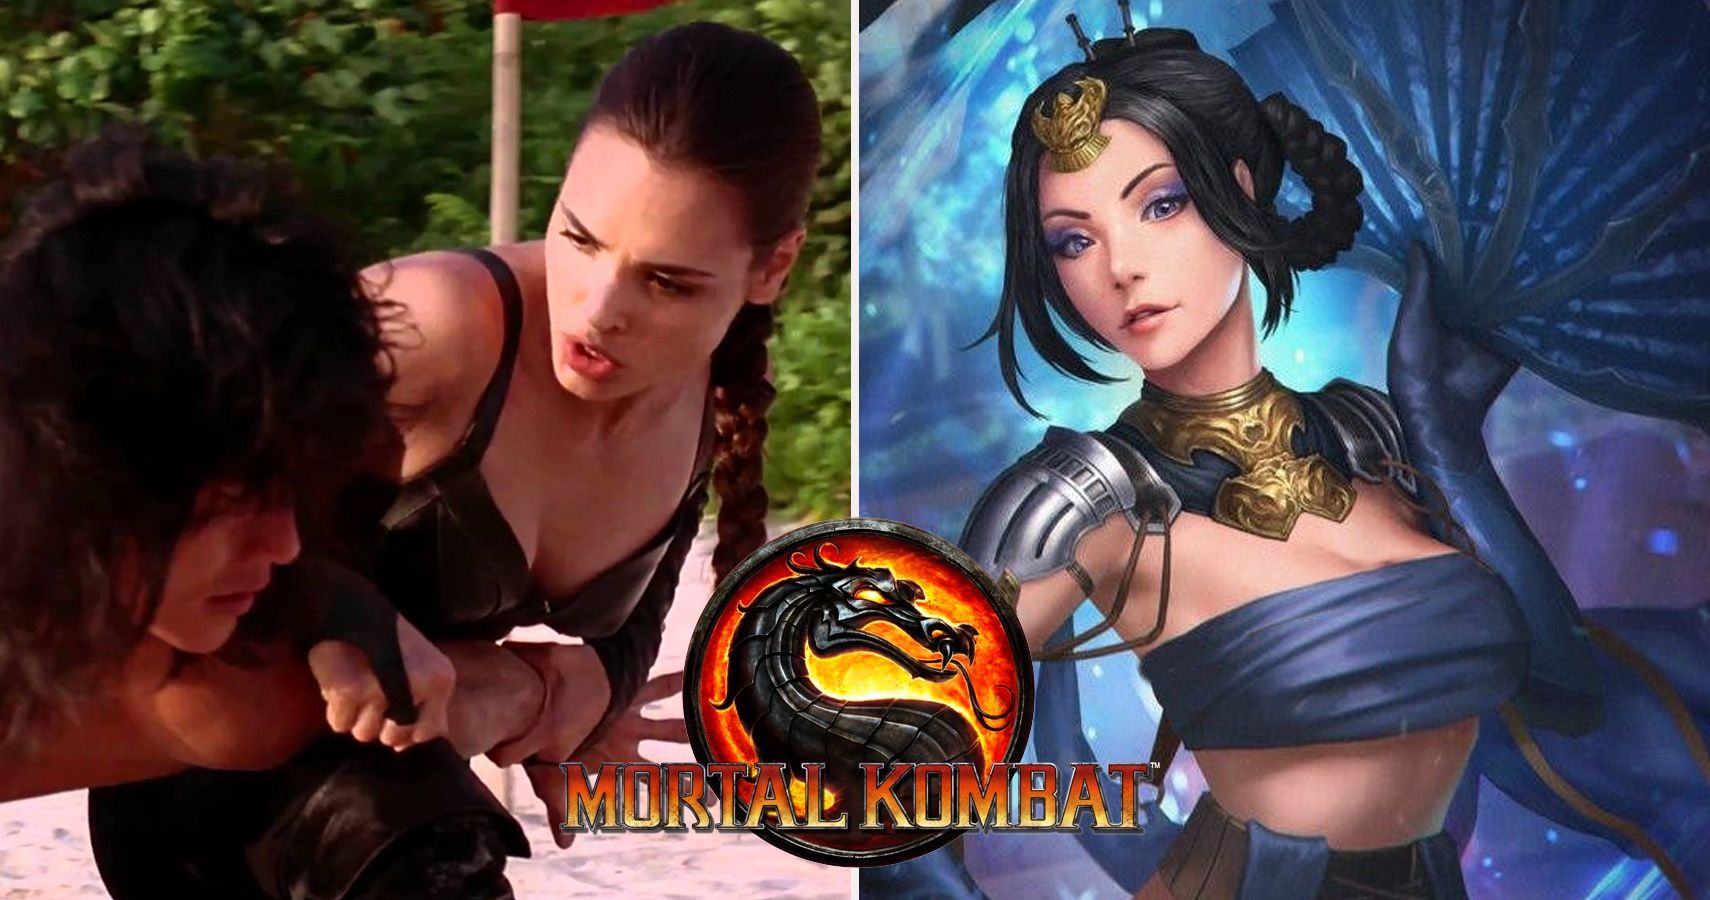 This Disney-styled Mortal Kombat character select screen even impressed Ed  Boon